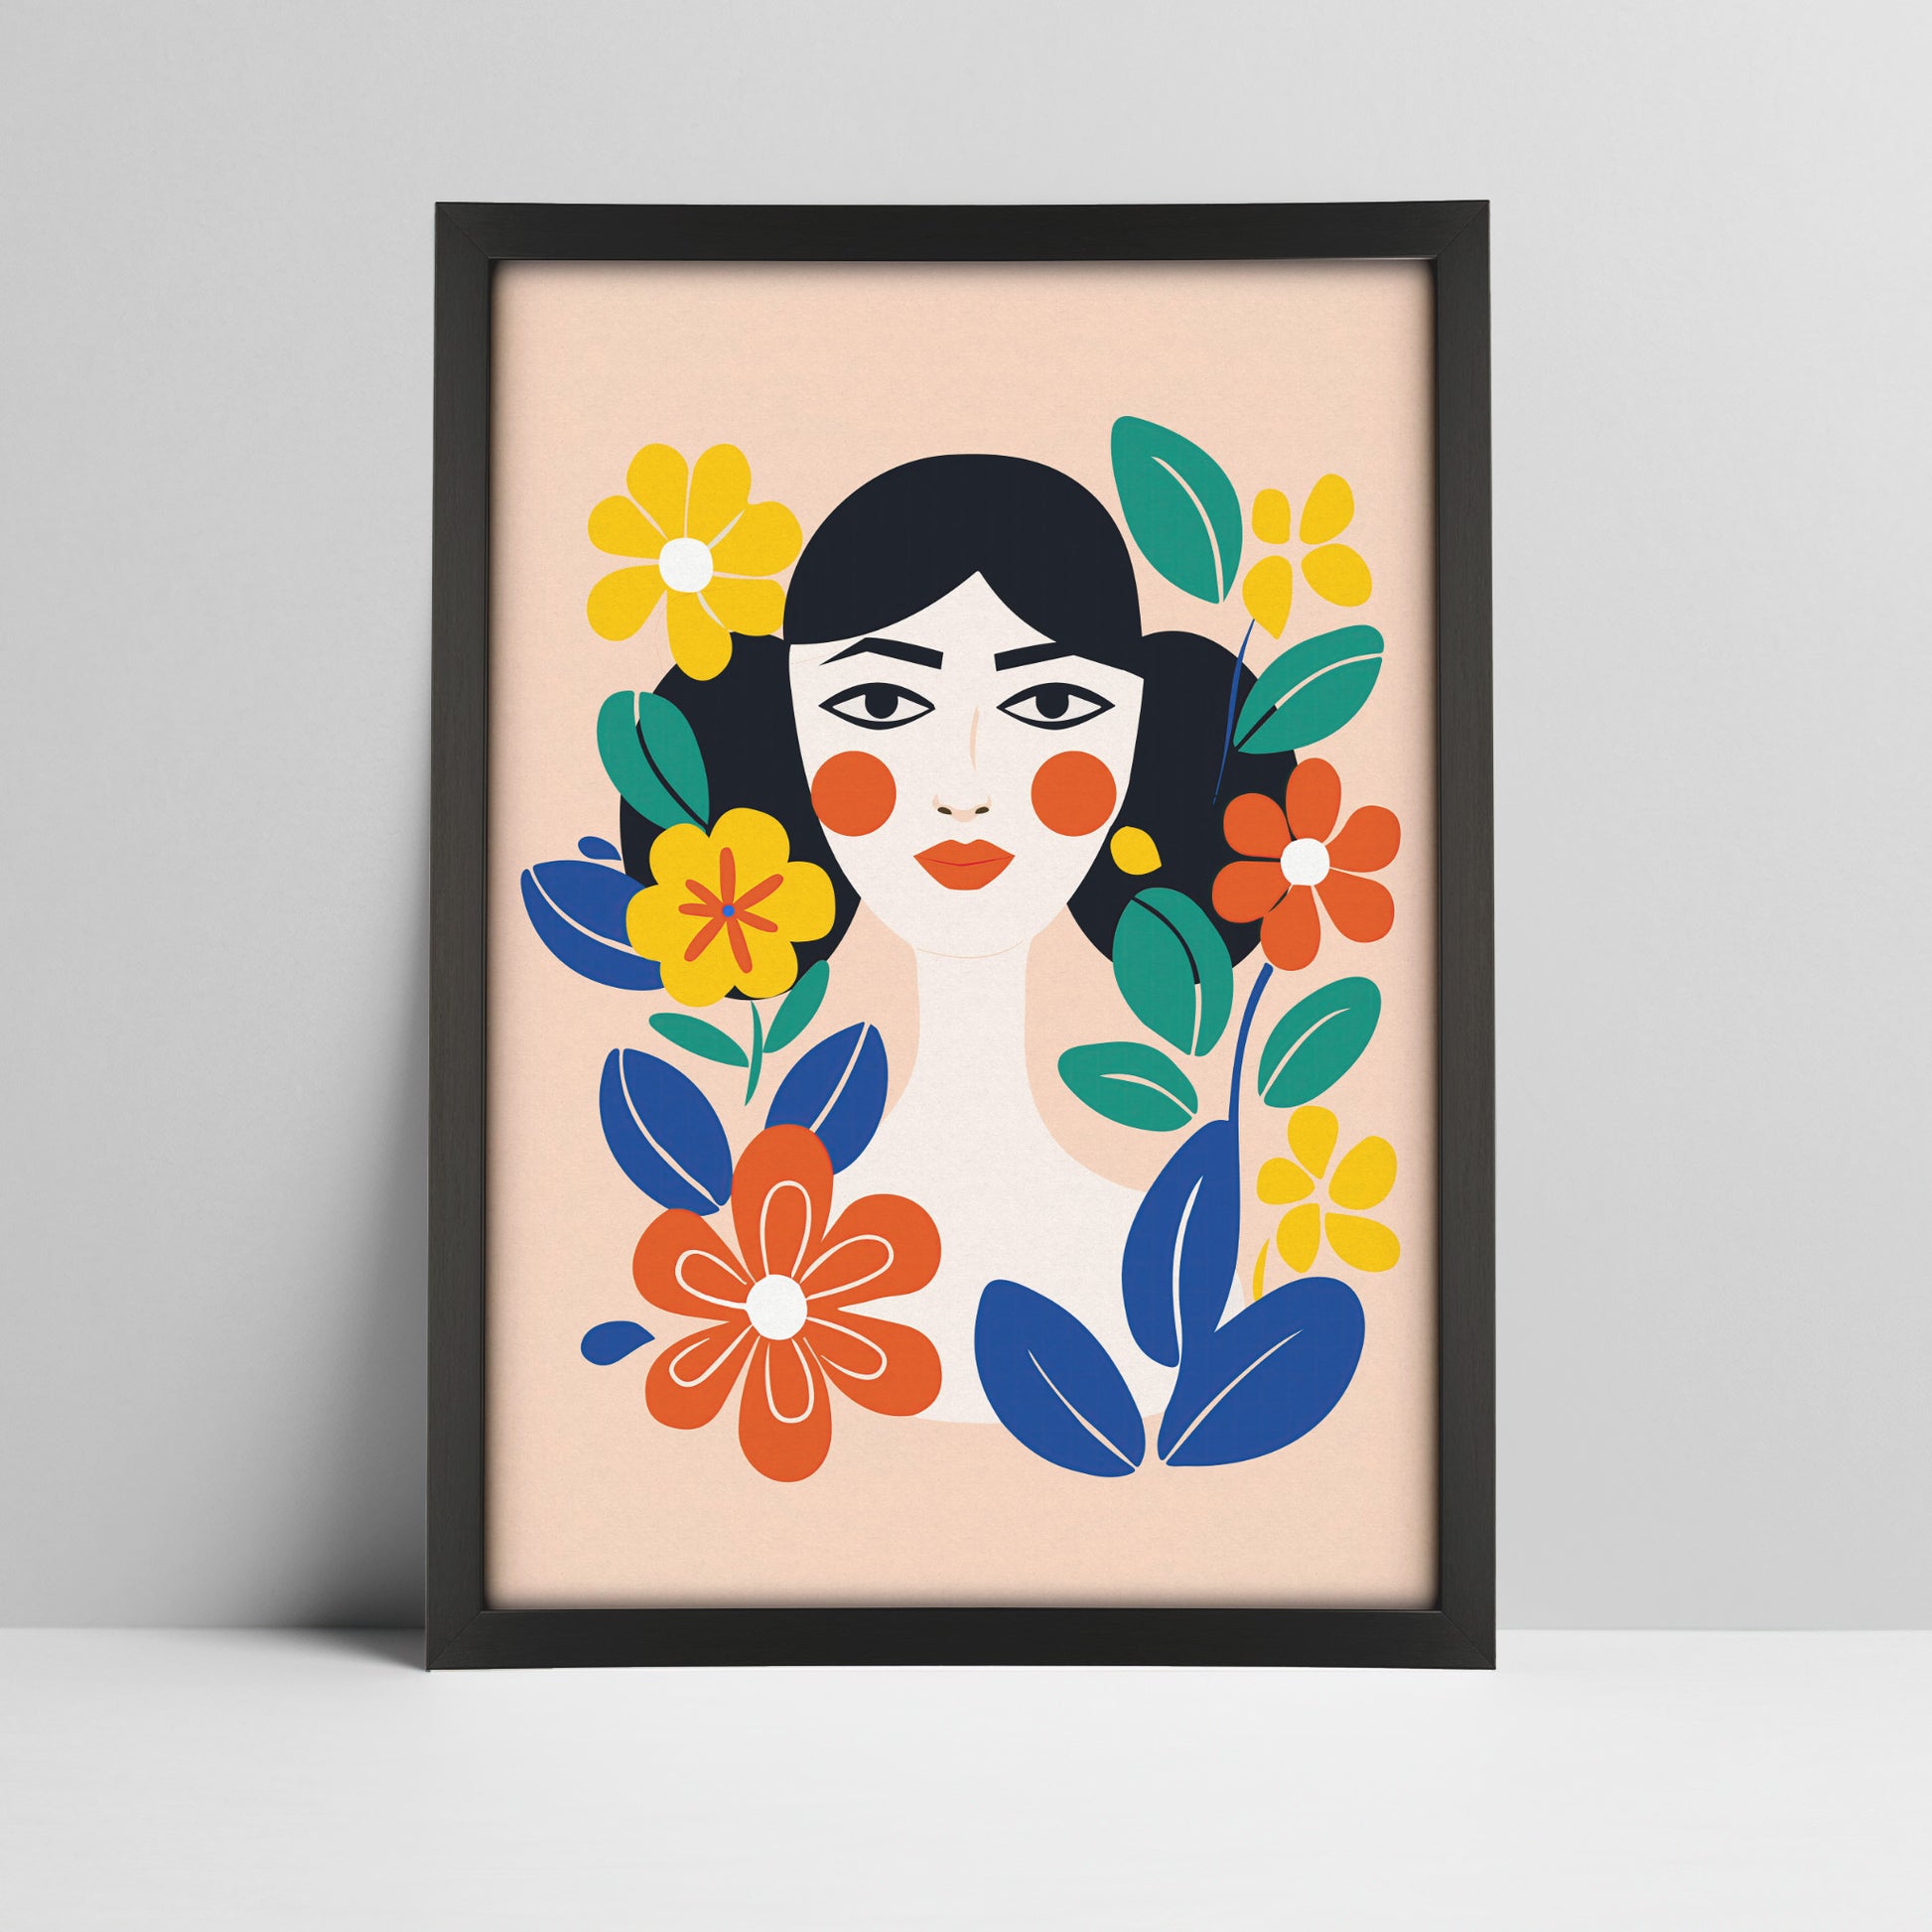 Art print of woman with stylized floral design in a black frame